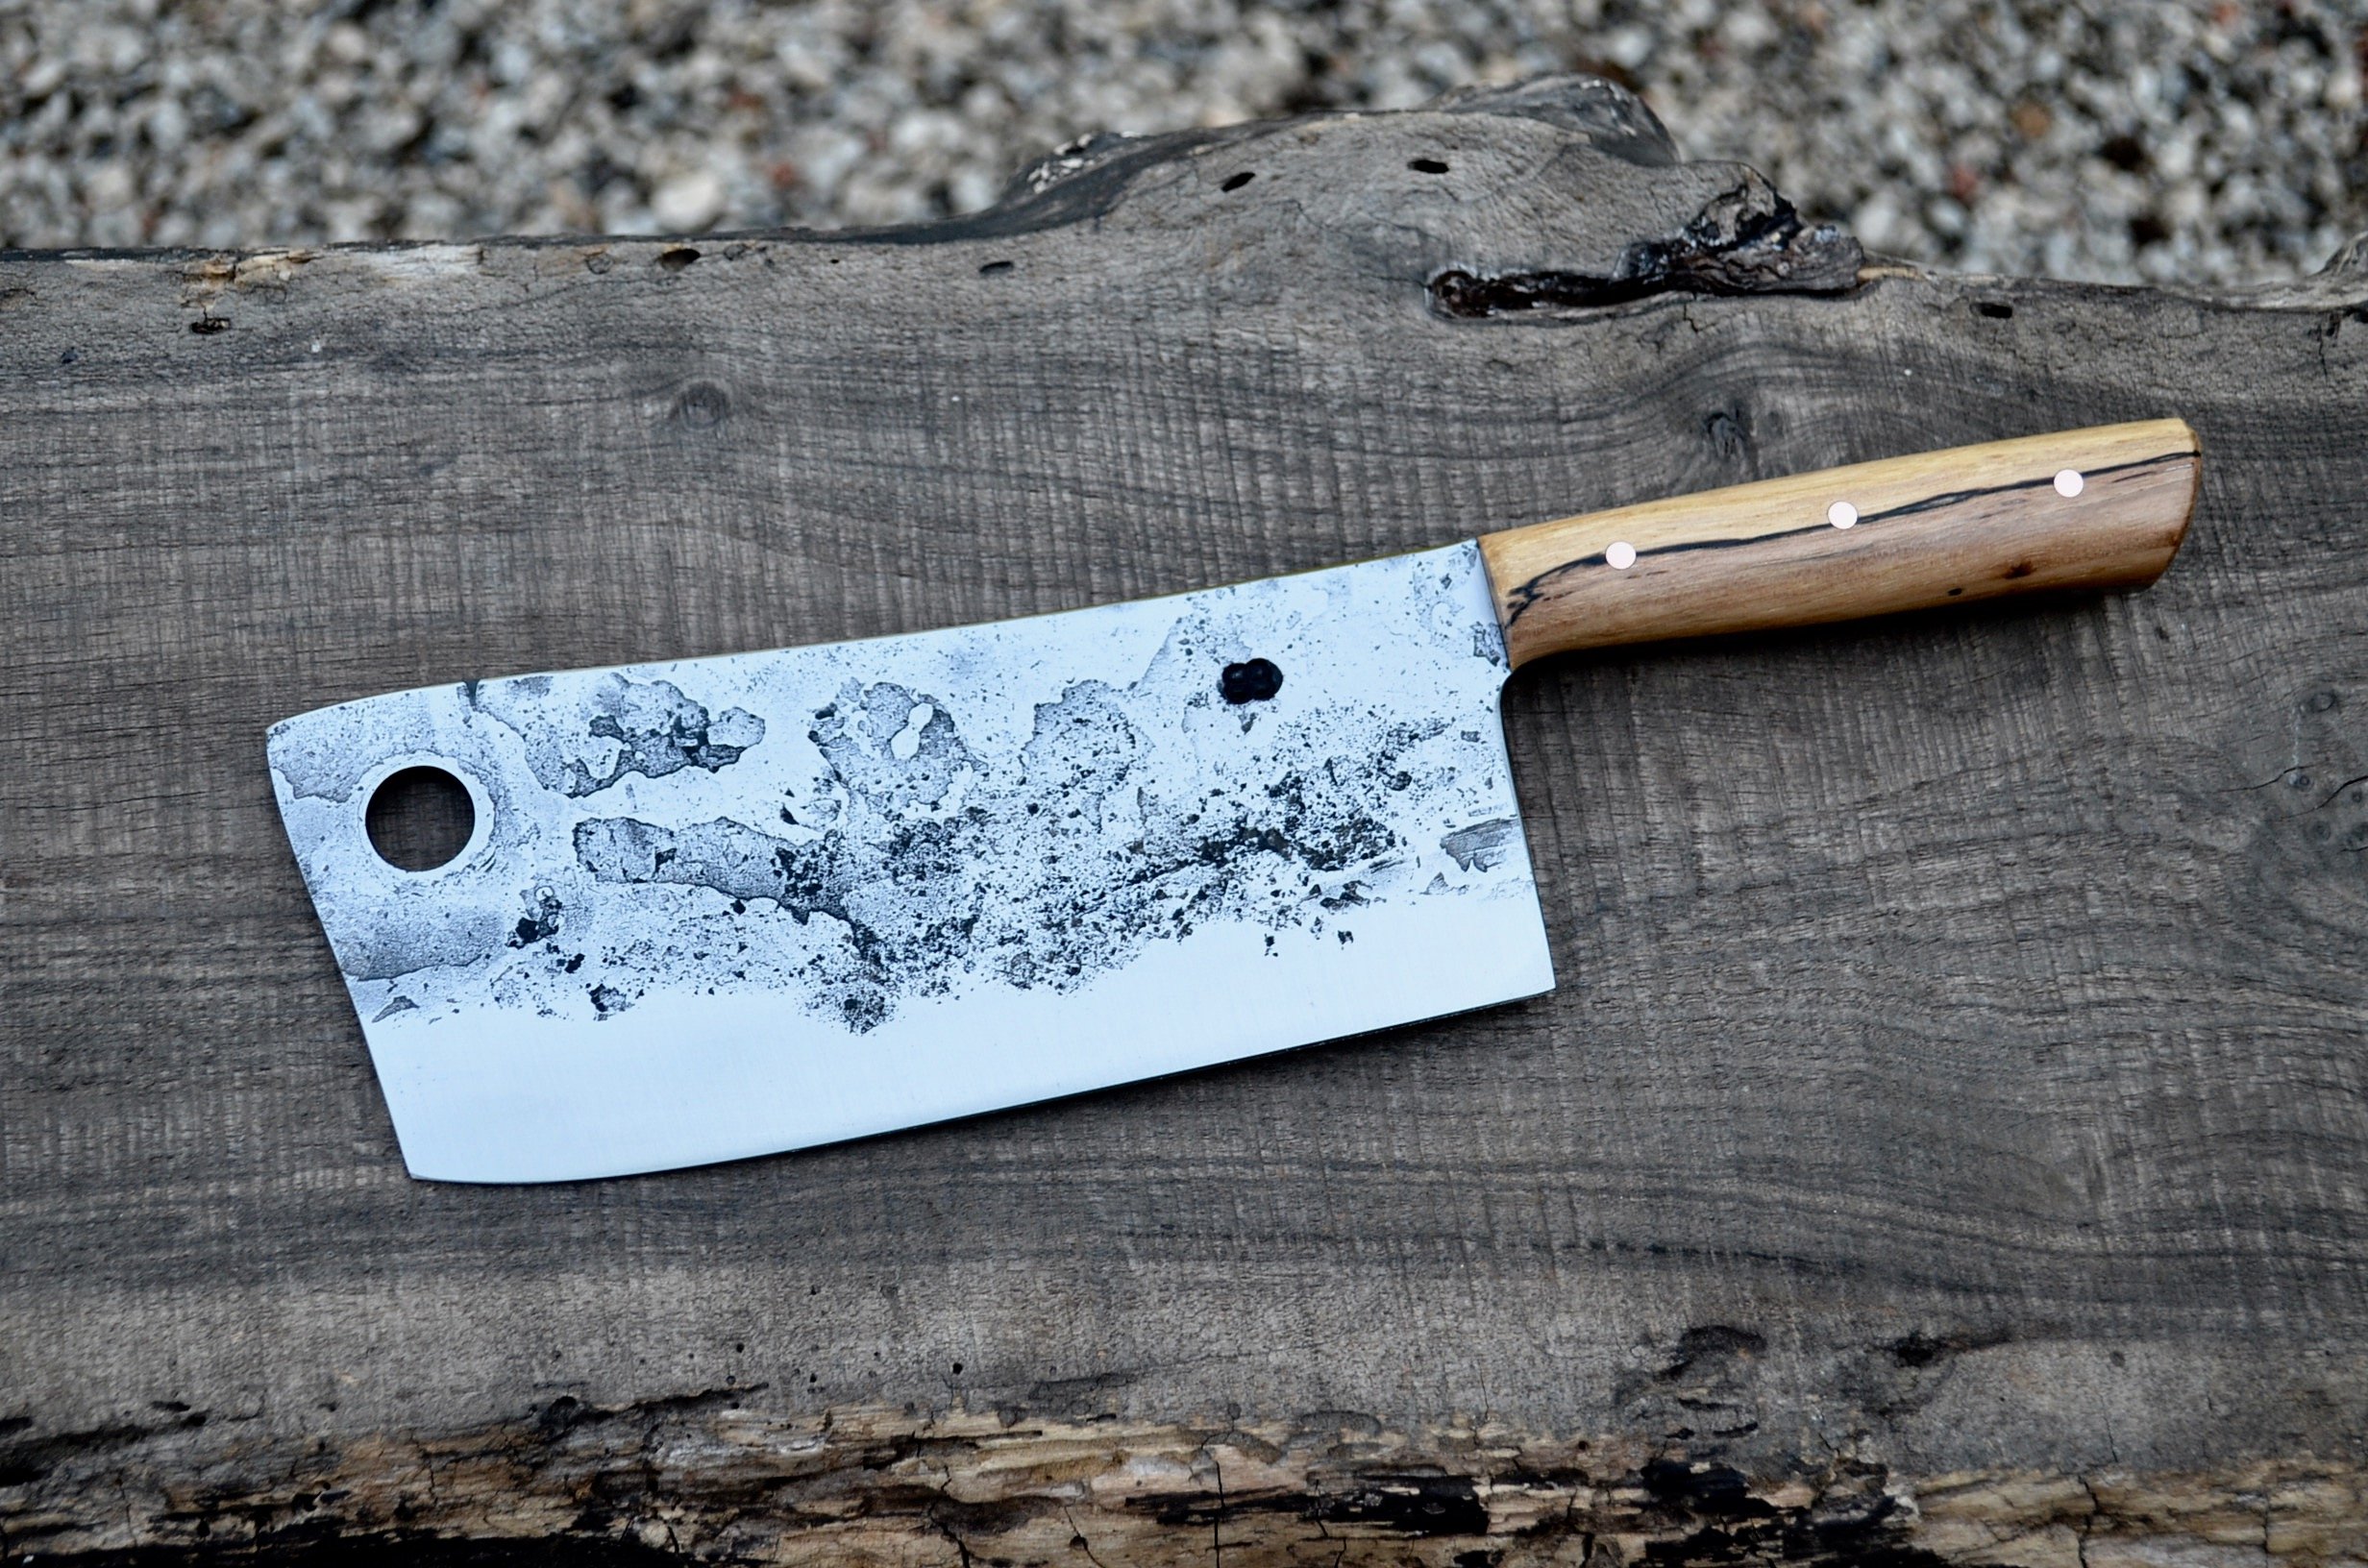  7.25” Full-Tang Cleaver. Western Spalted Pecan Handle with Brass Pins. 